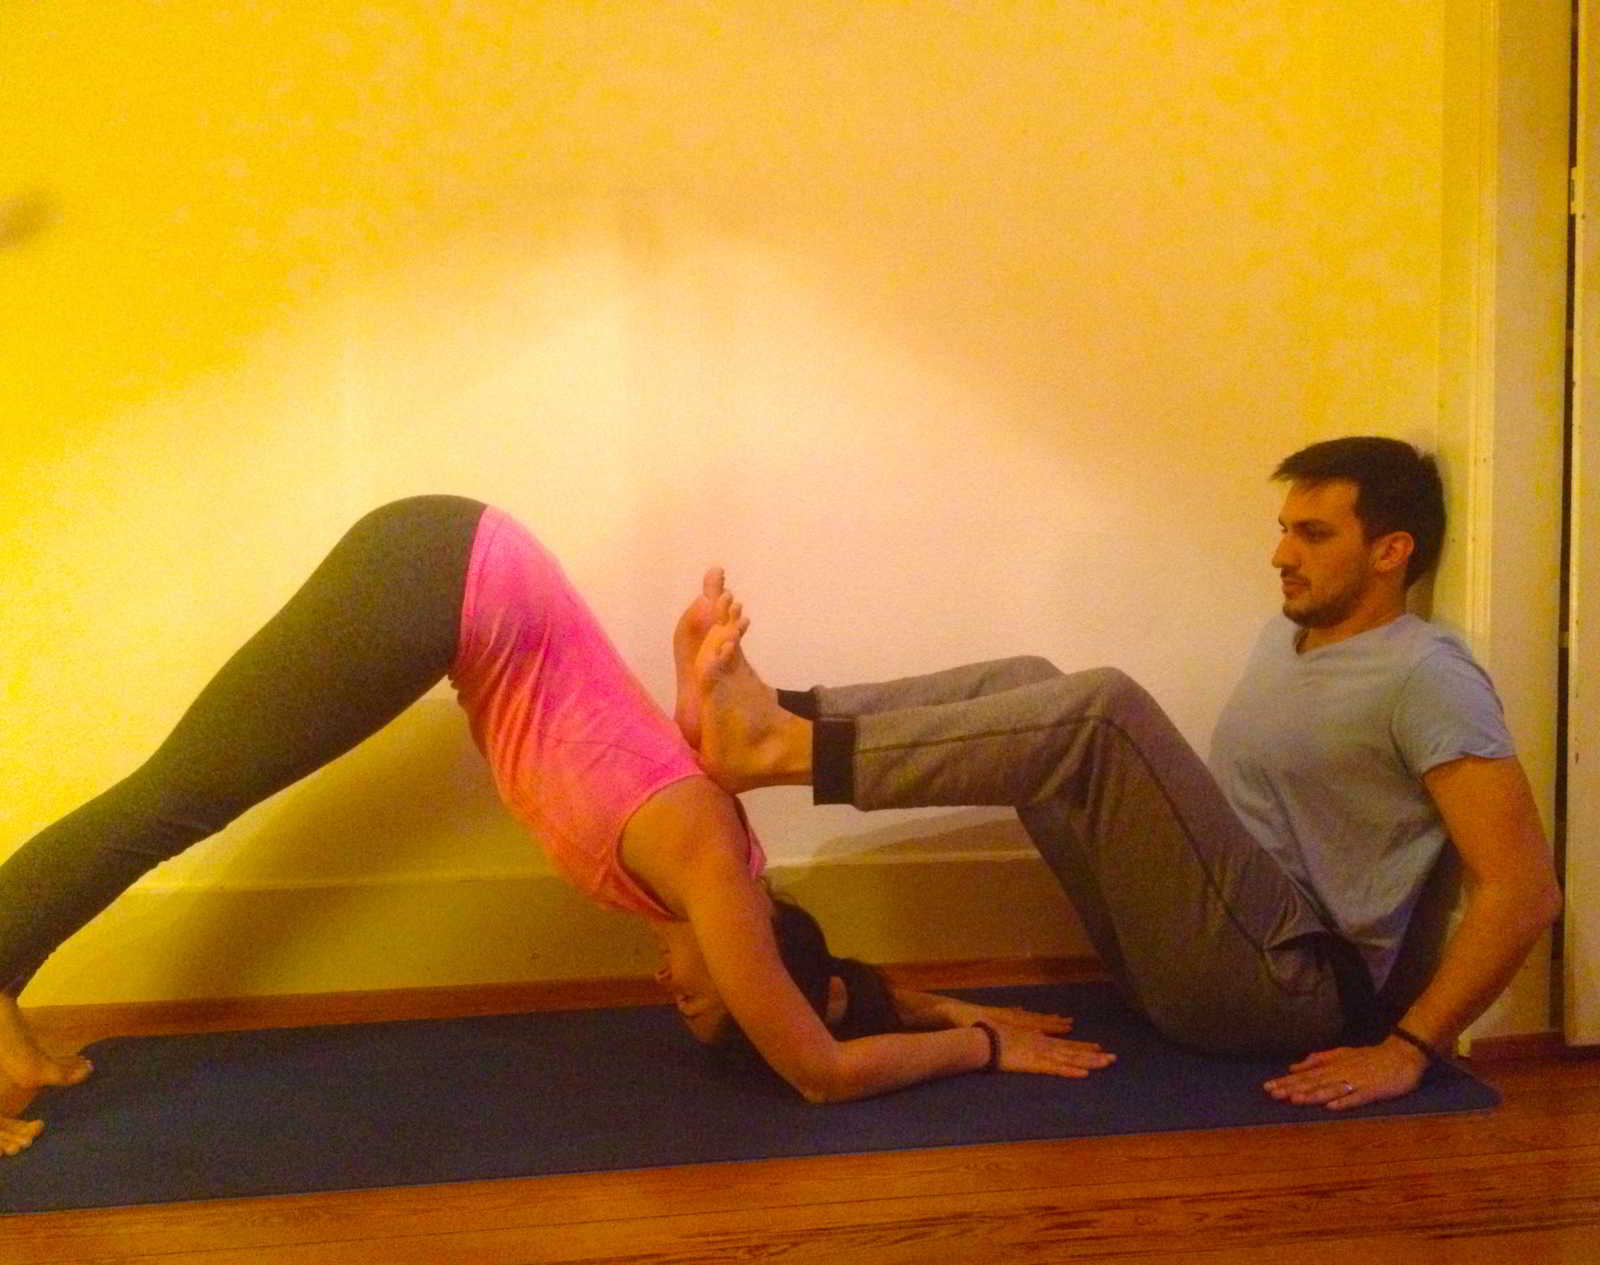 Easy Yoga Poses For Two People - Beginners Guide To Couples Yoga | Yoga  poses for two, Yoga for beginners, Easy yoga poses